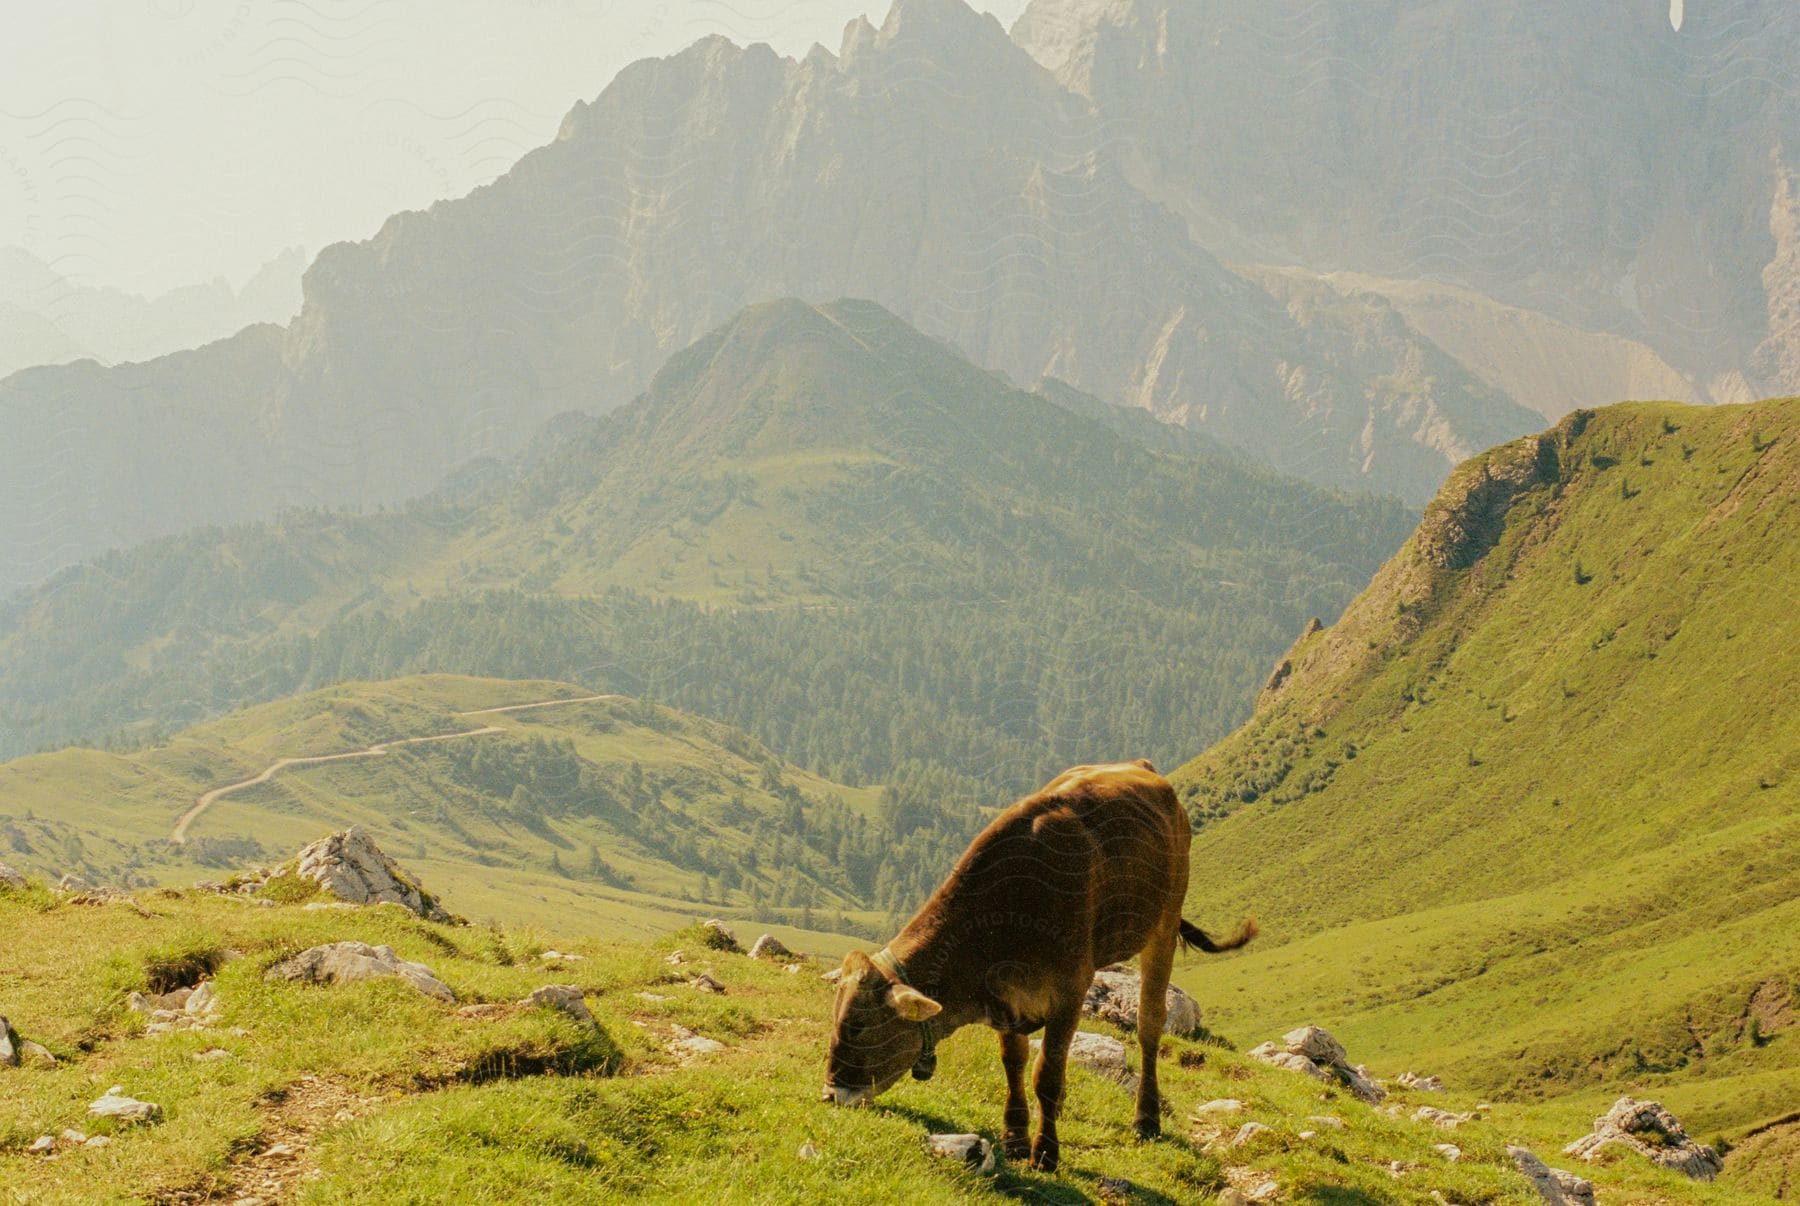 A wild cow on a hill is eating grass from the ground in a mountainous region